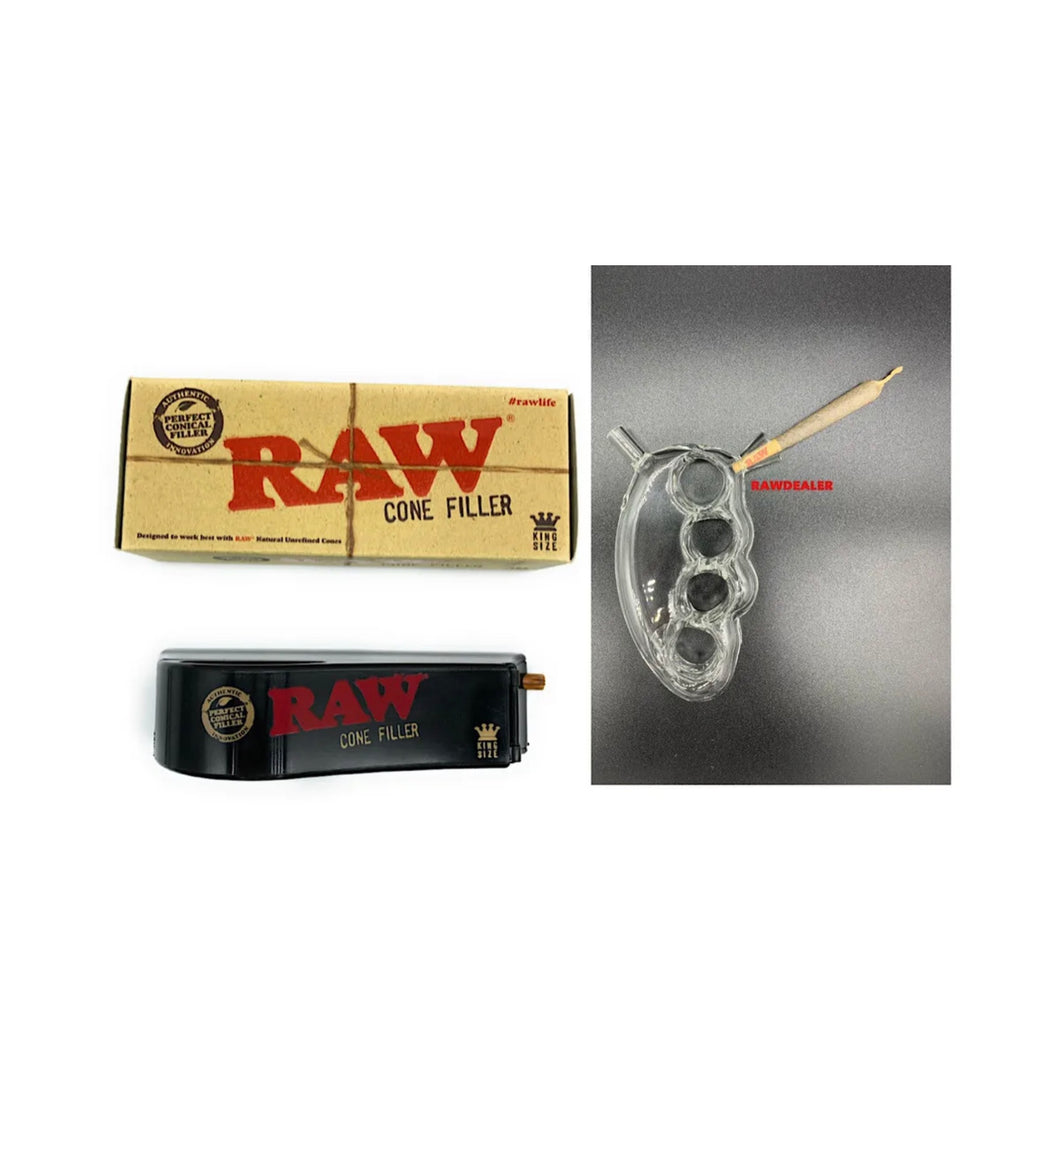 Raw king size cone Shooter filler +glass knuckle cone bubbler smoke water pipe